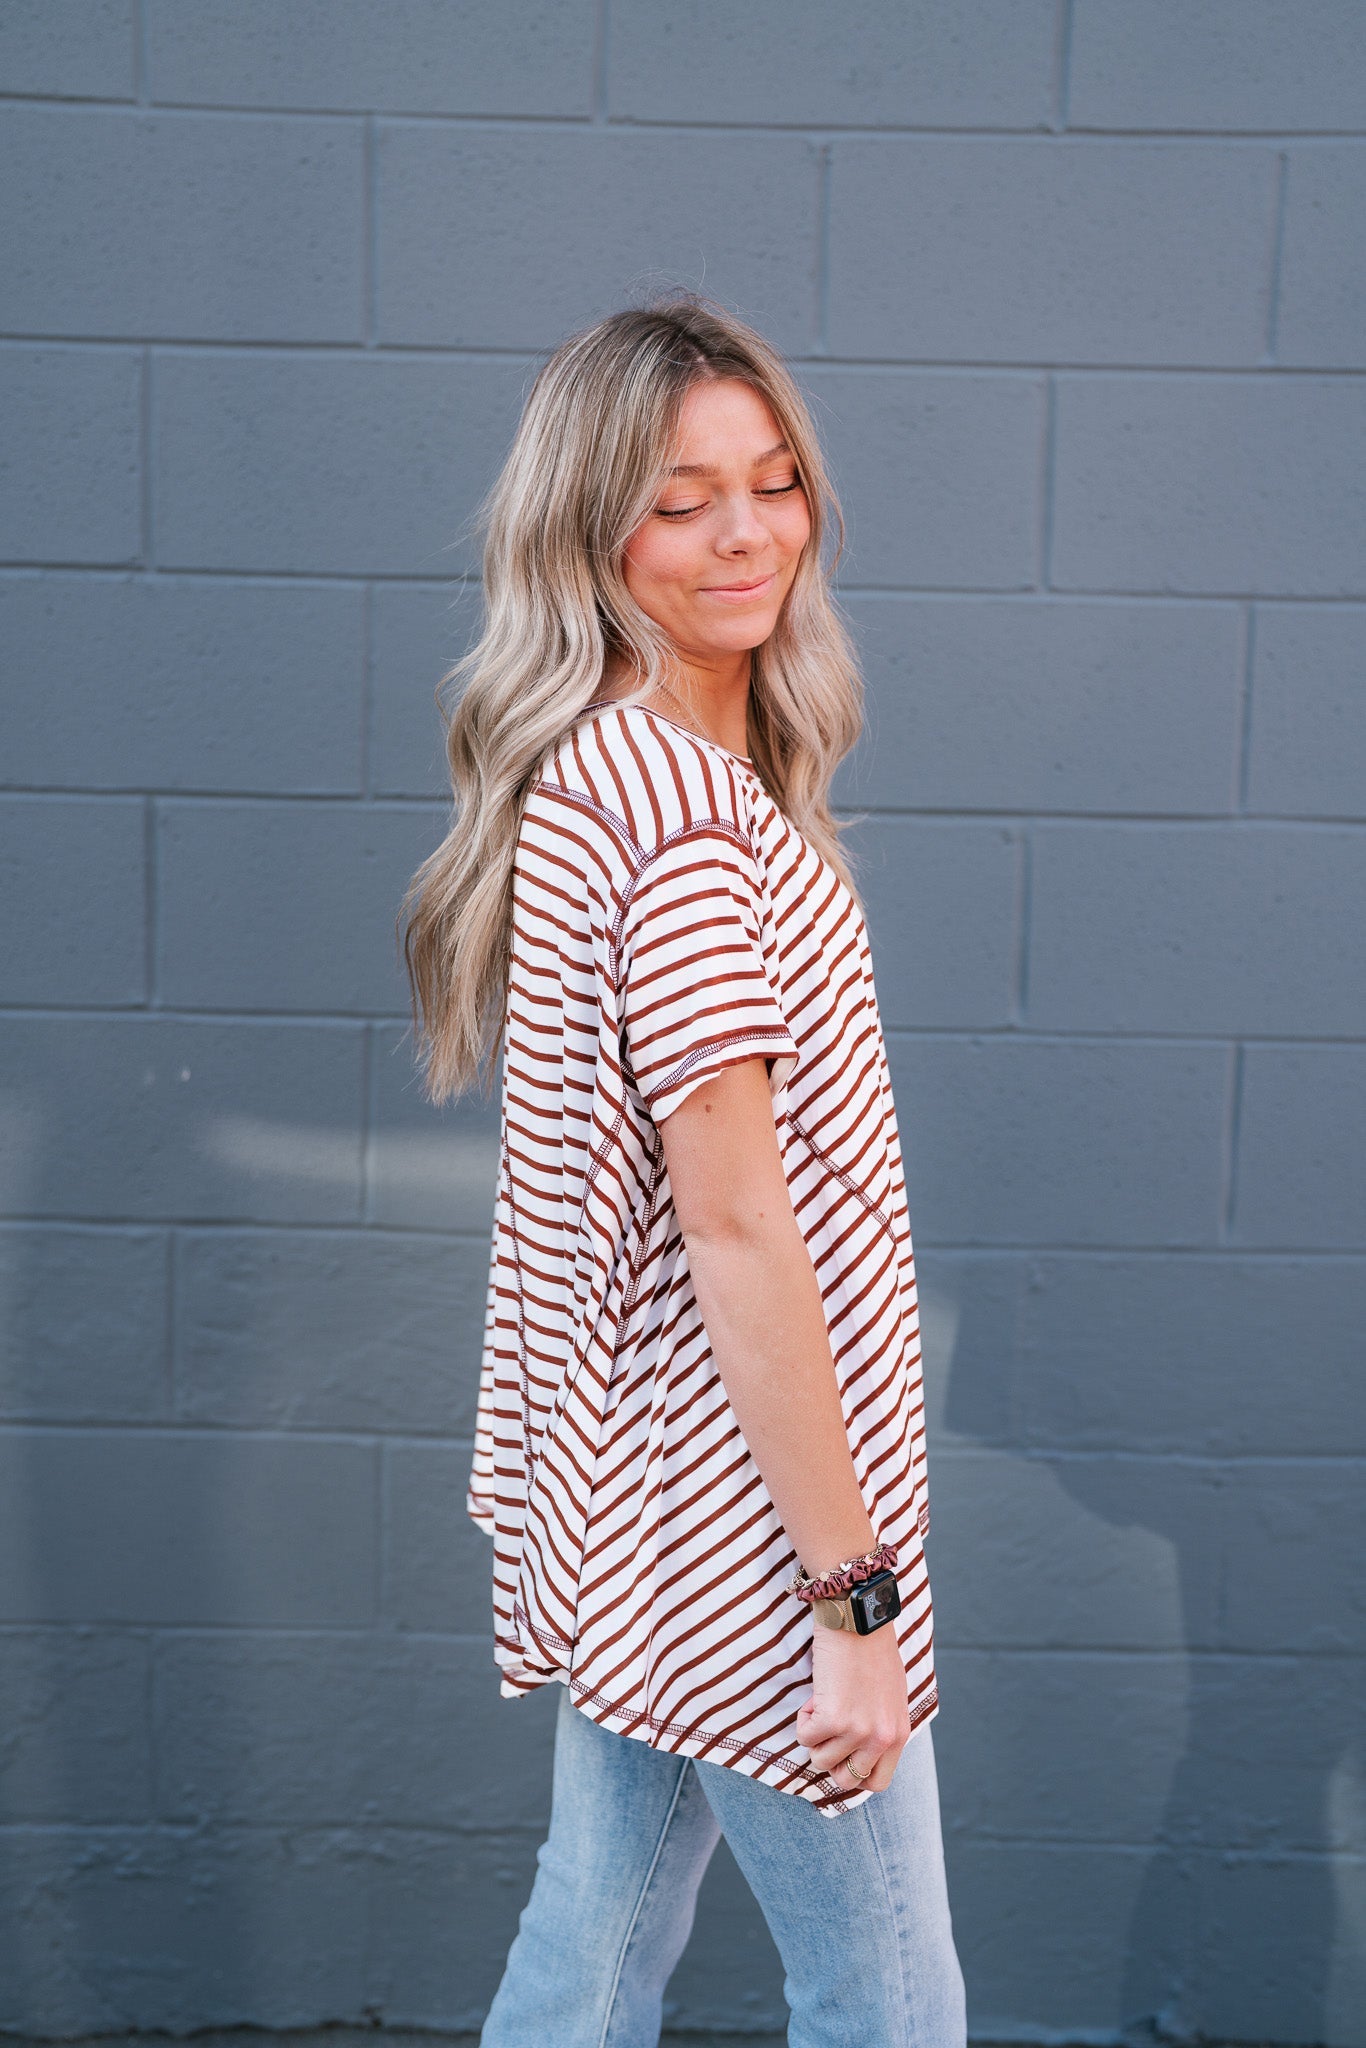 No Brainer Striped Top - Coffee